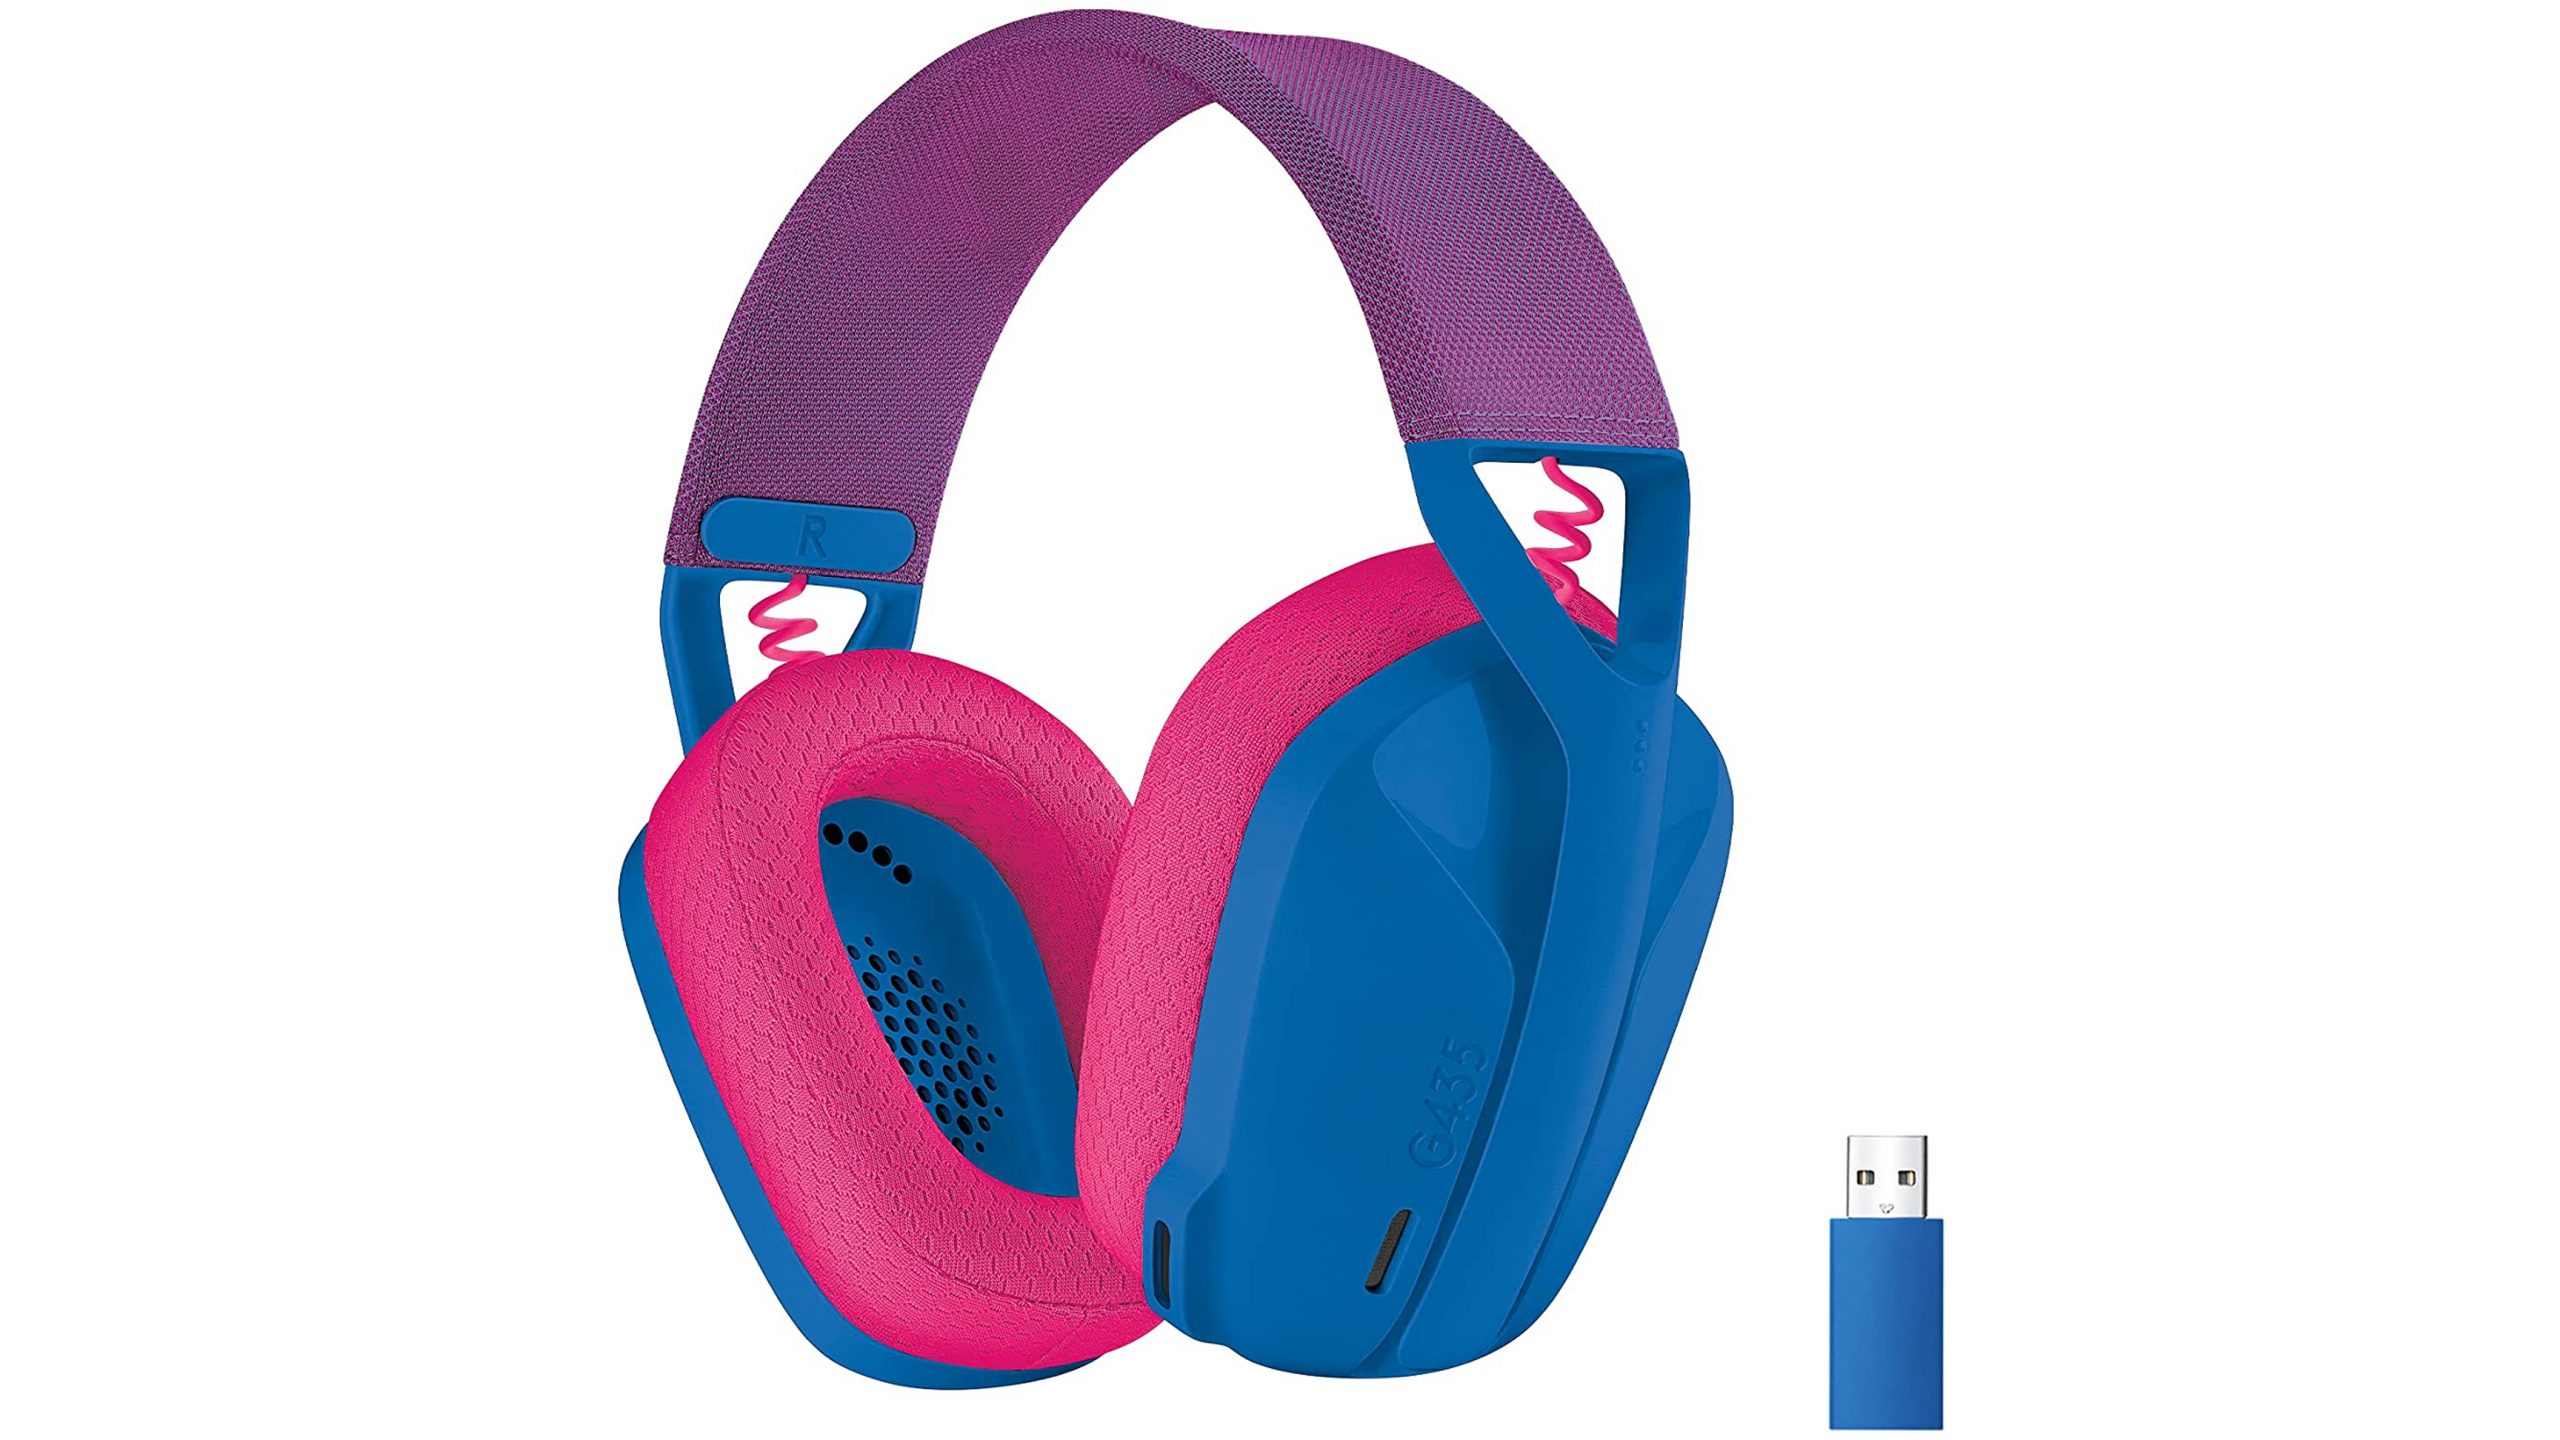 The Logitech G435 gaming headset in blue, purple, and pink against a white background.